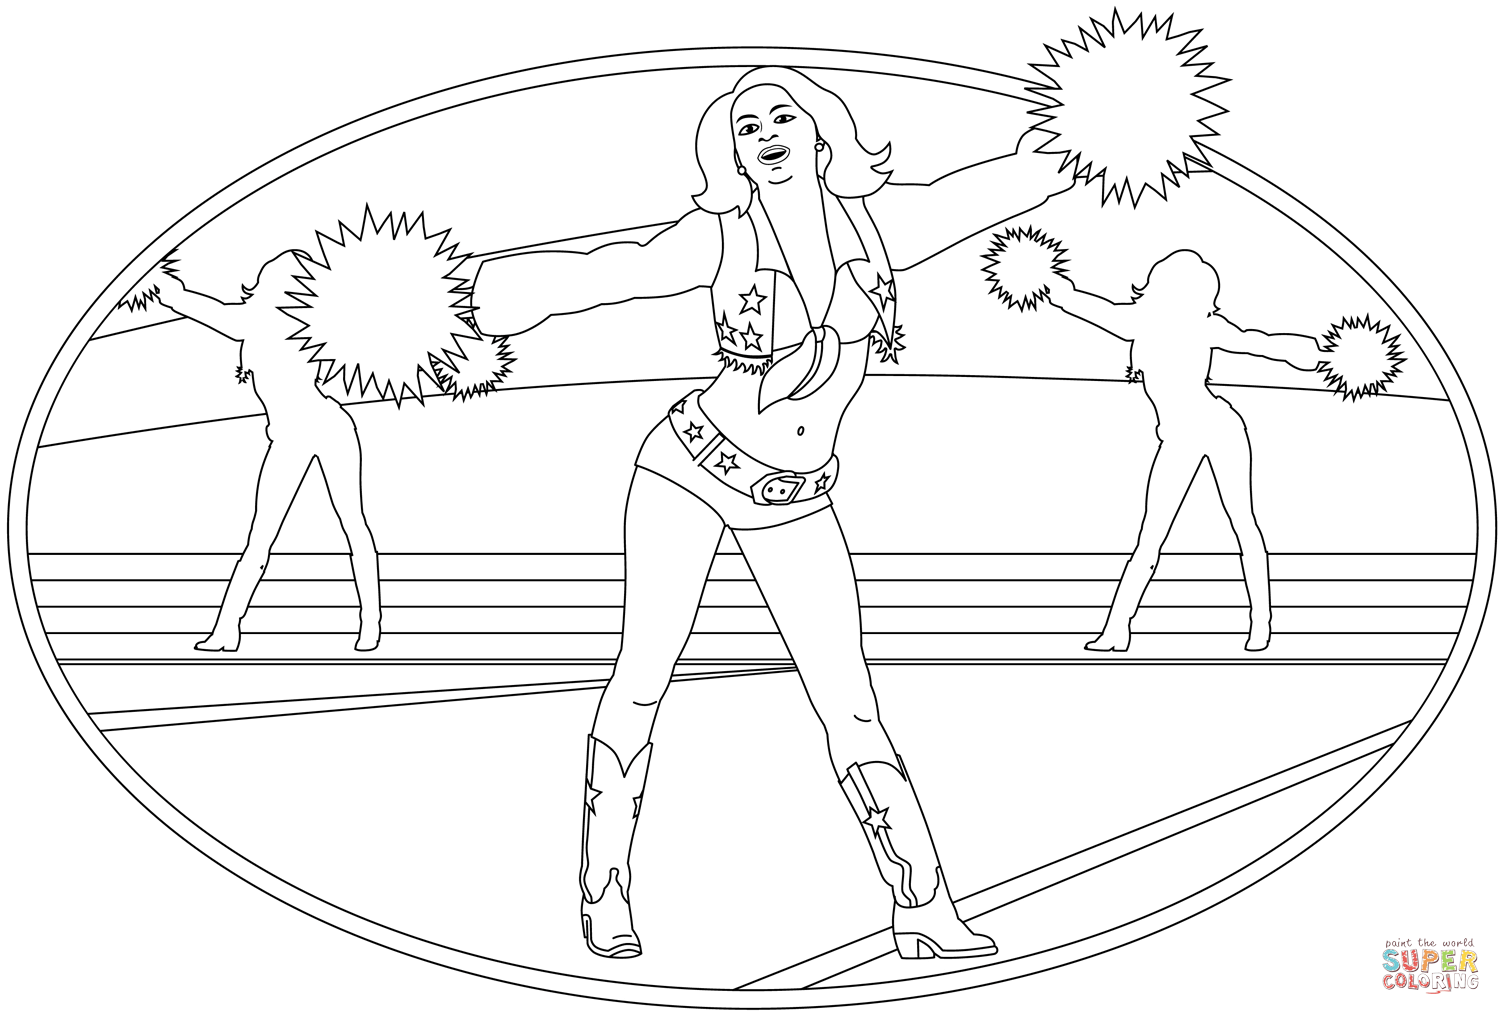 Cheerleader coloring page free printable coloring pages